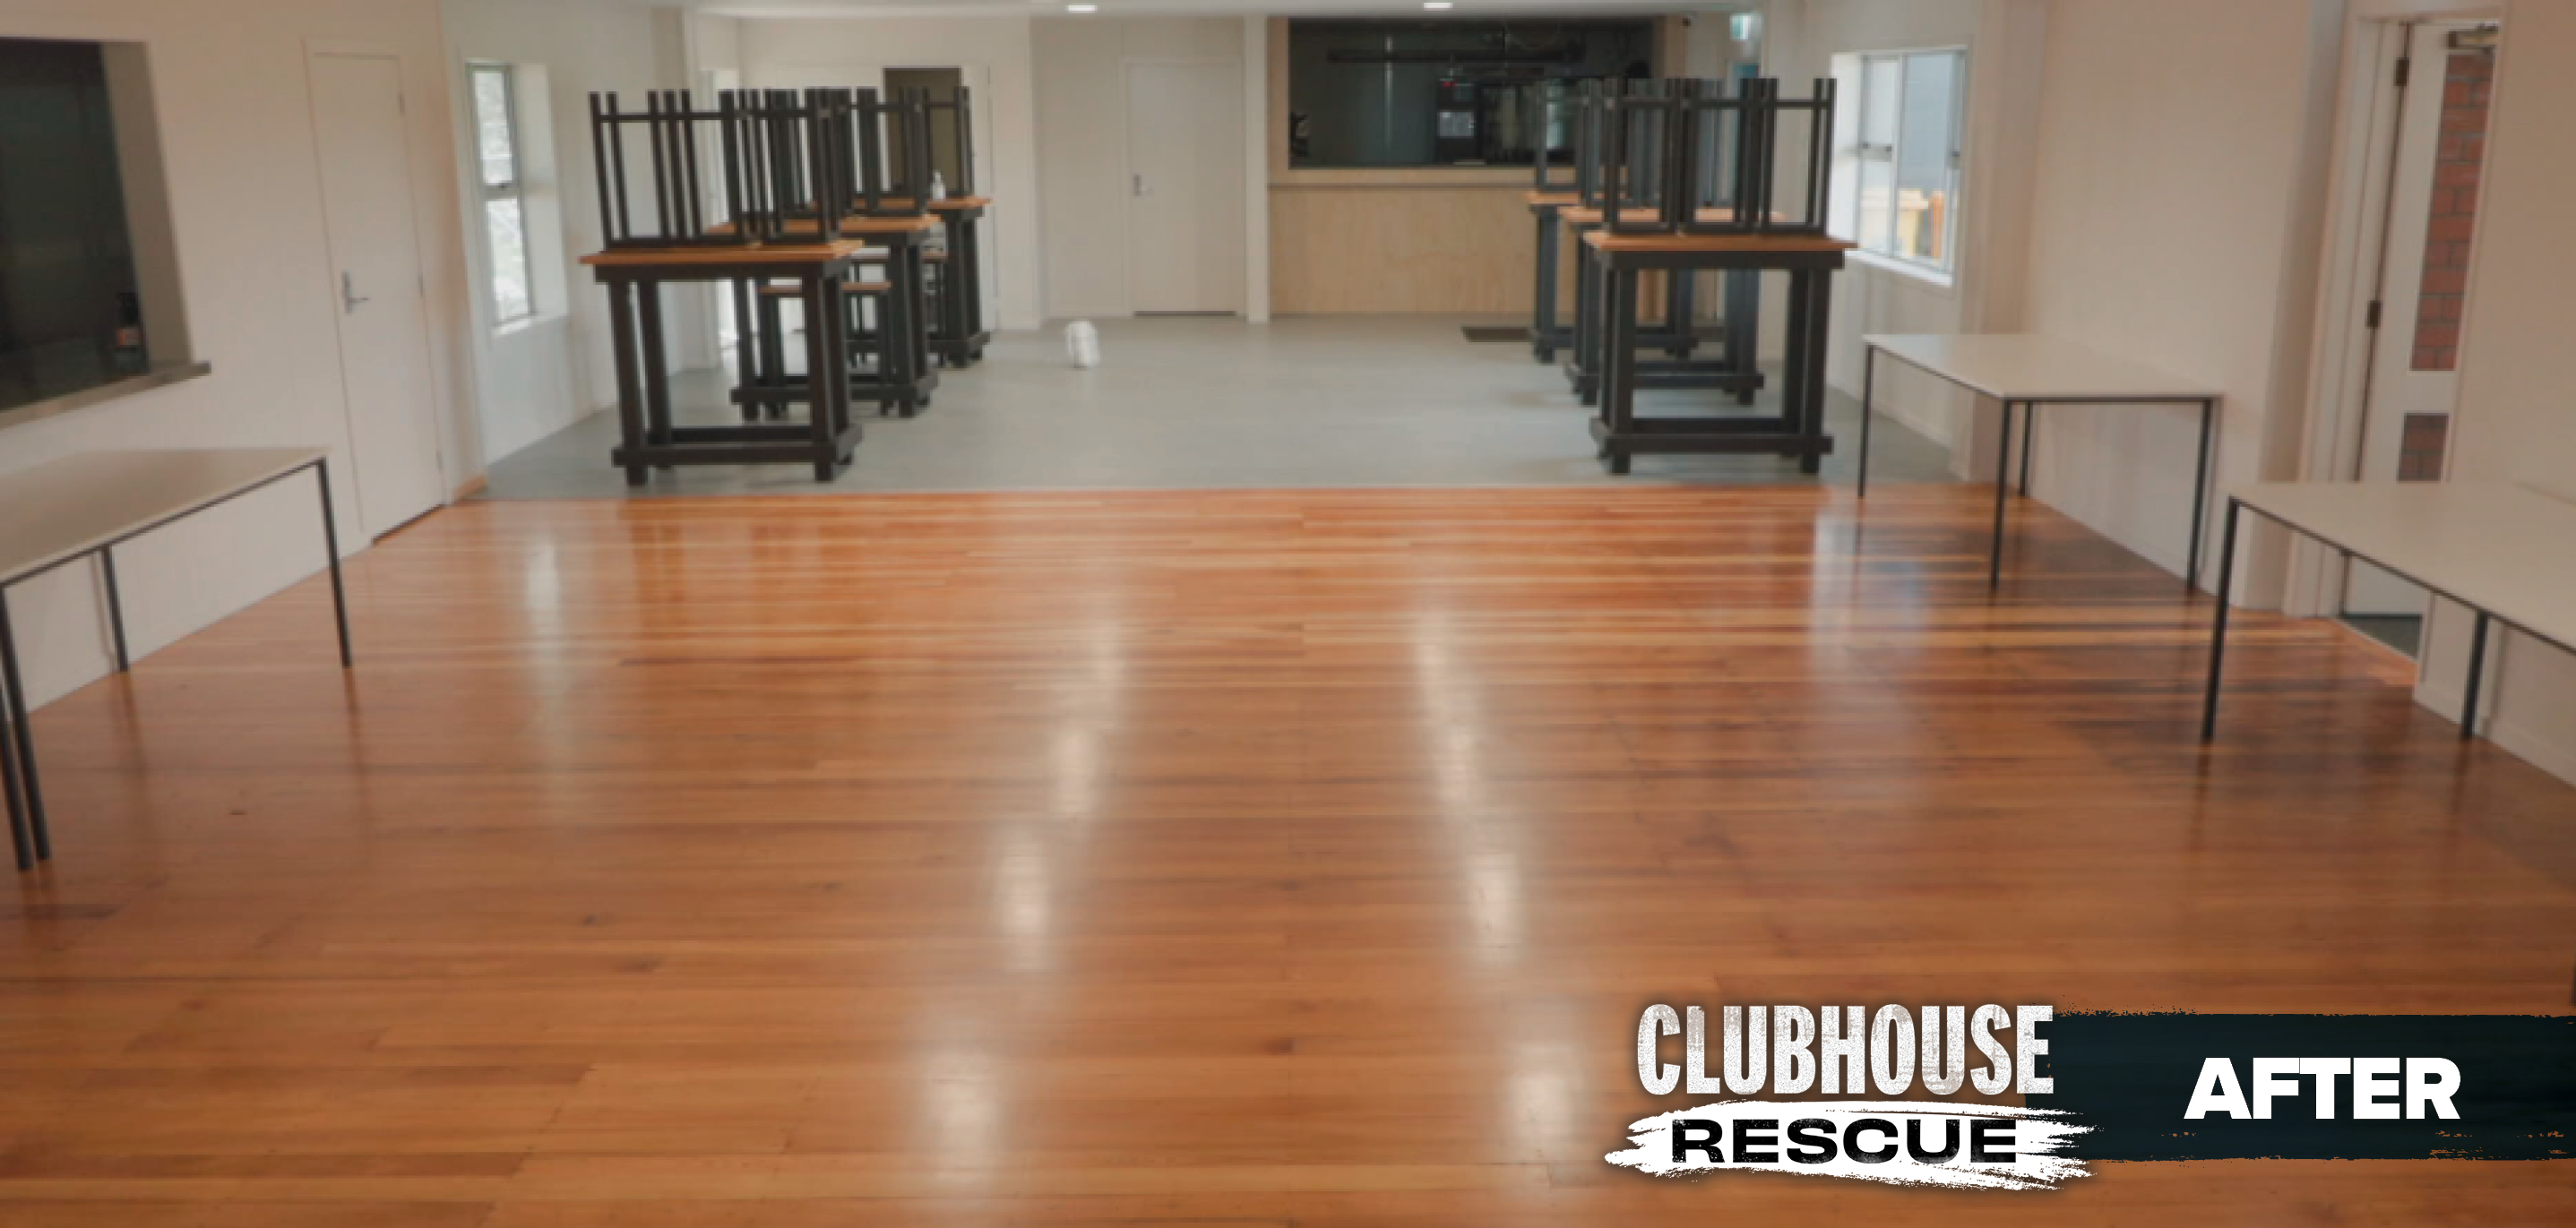 Clubhouse Ep 3 - After Photo 7